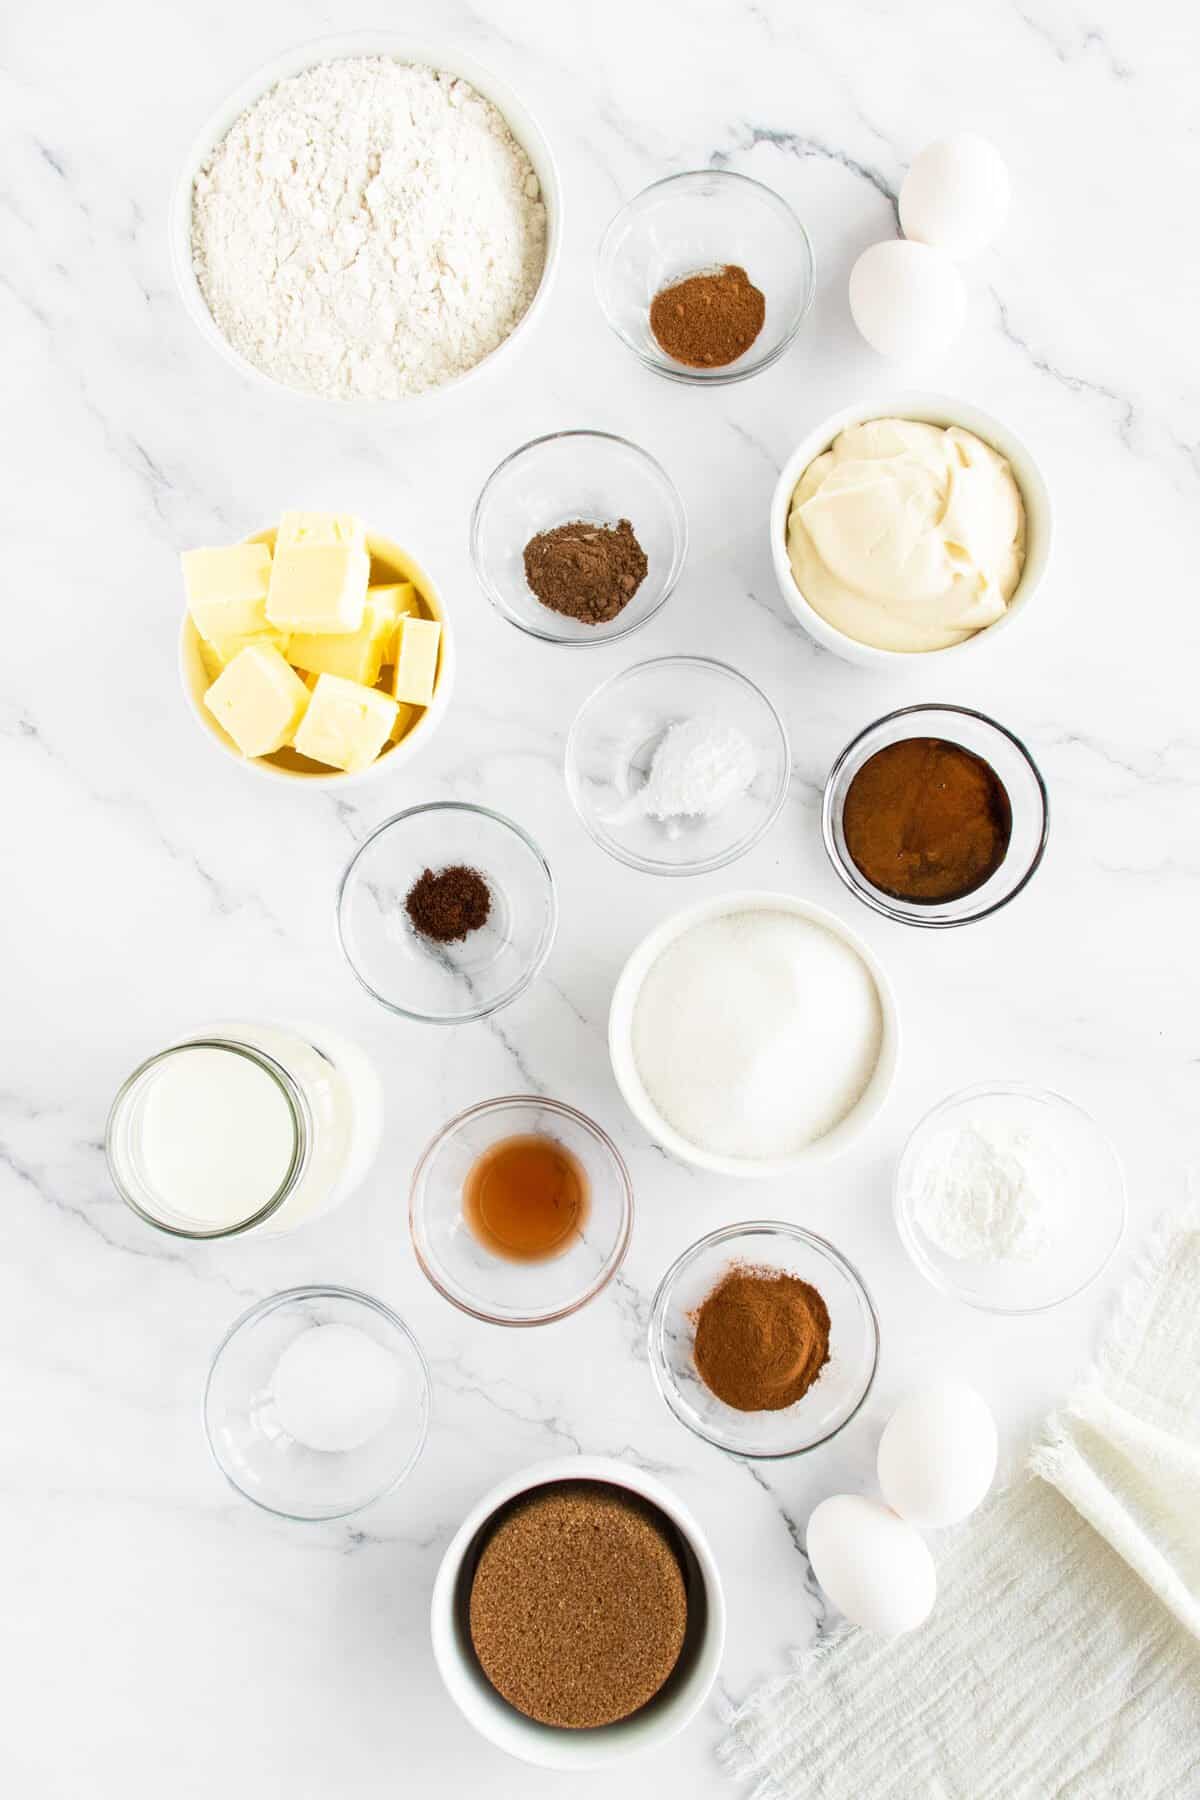 Spice Cake ingredients